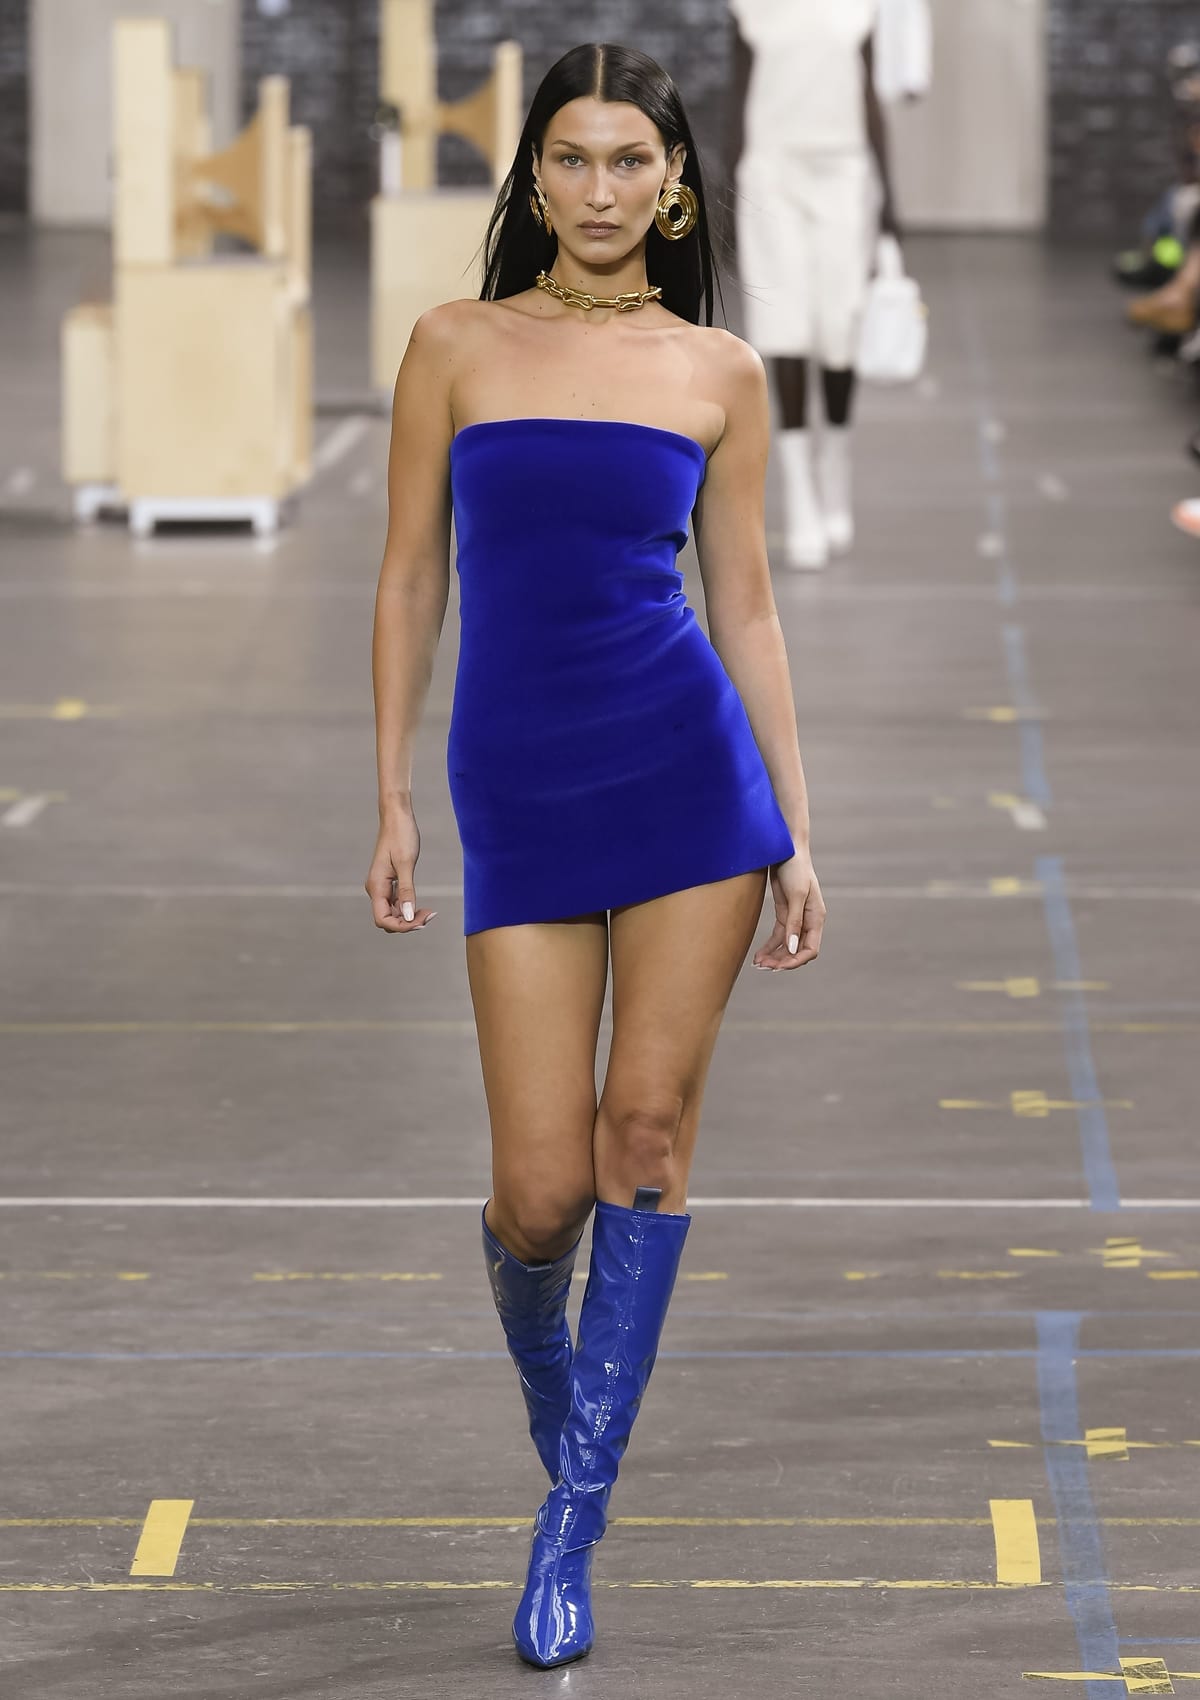 Bella Hadid wears an outfit from the Off-White Fall 2021 Ready-to-Wear collection